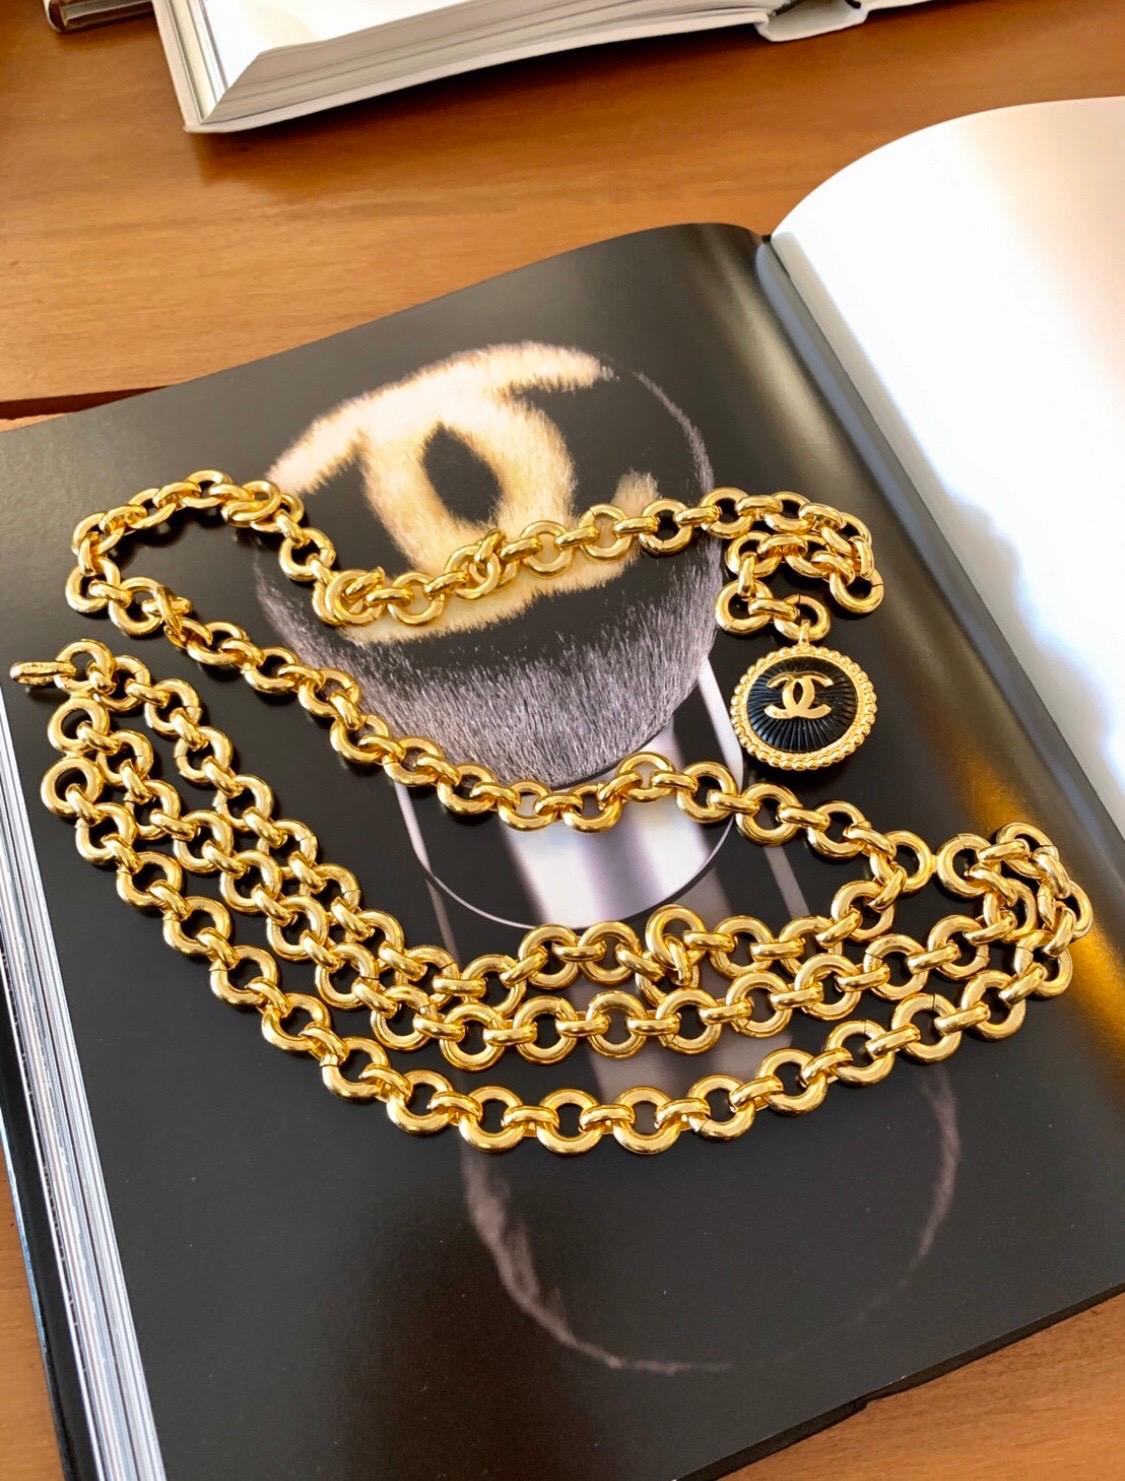 Rare 1970s Chanel gold toned chain belt features front triple chains and a gold toned CC resin charm. Adjustable hook fastening. It can be worn as a belt or a layered necklace. Stamped CHANEL. Chain Length 84cm (33 inches) Charm 3.2cm chain width